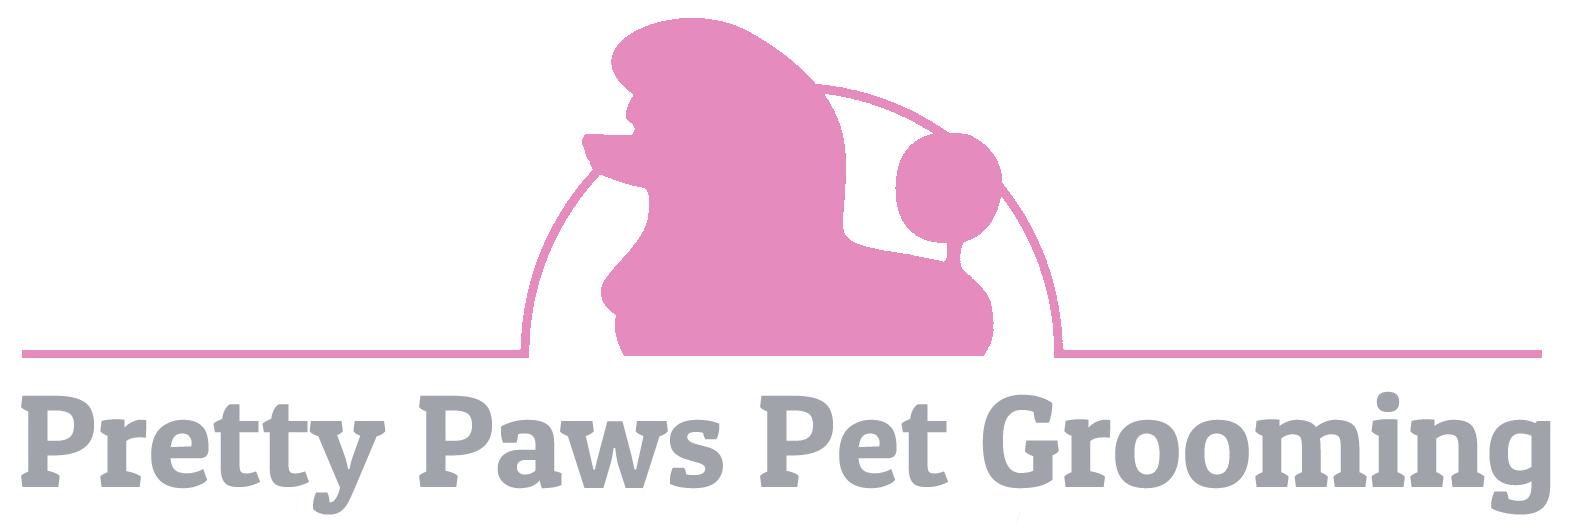 Pretty Paws Pet Grooming Logo